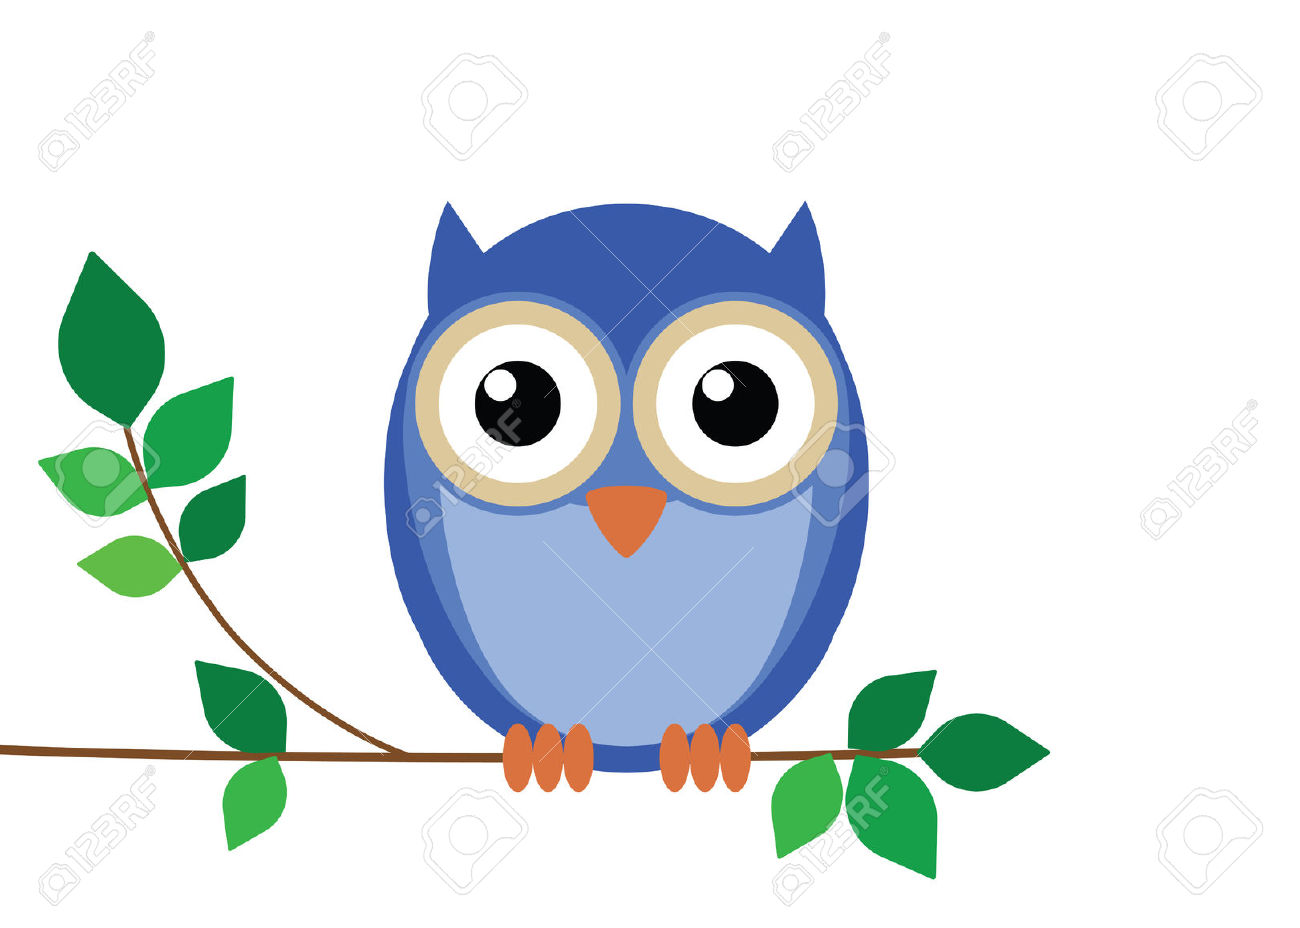 Wise Old Owl Sat On A Tree Branch Royalty Free Cliparts, Vectors.